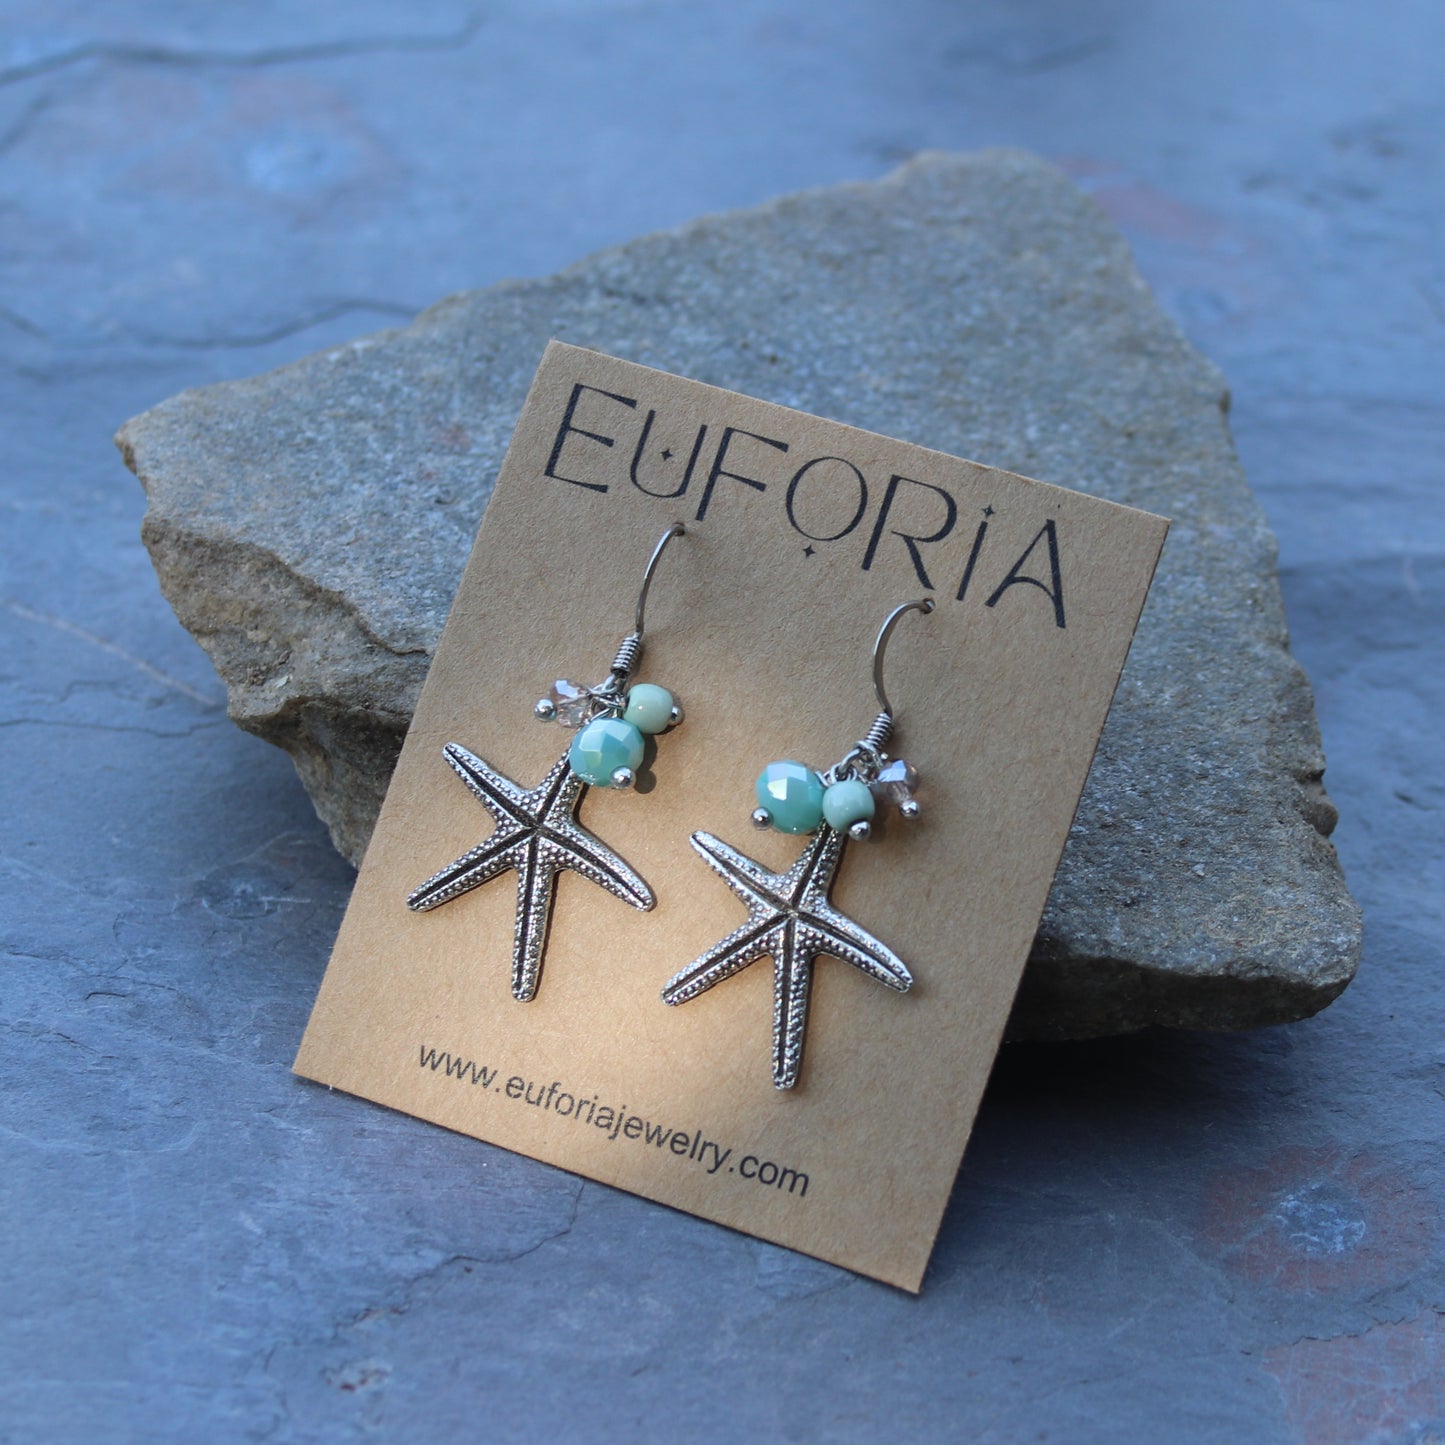 1" silver plated pewter starfish charm with bead cluster earrings